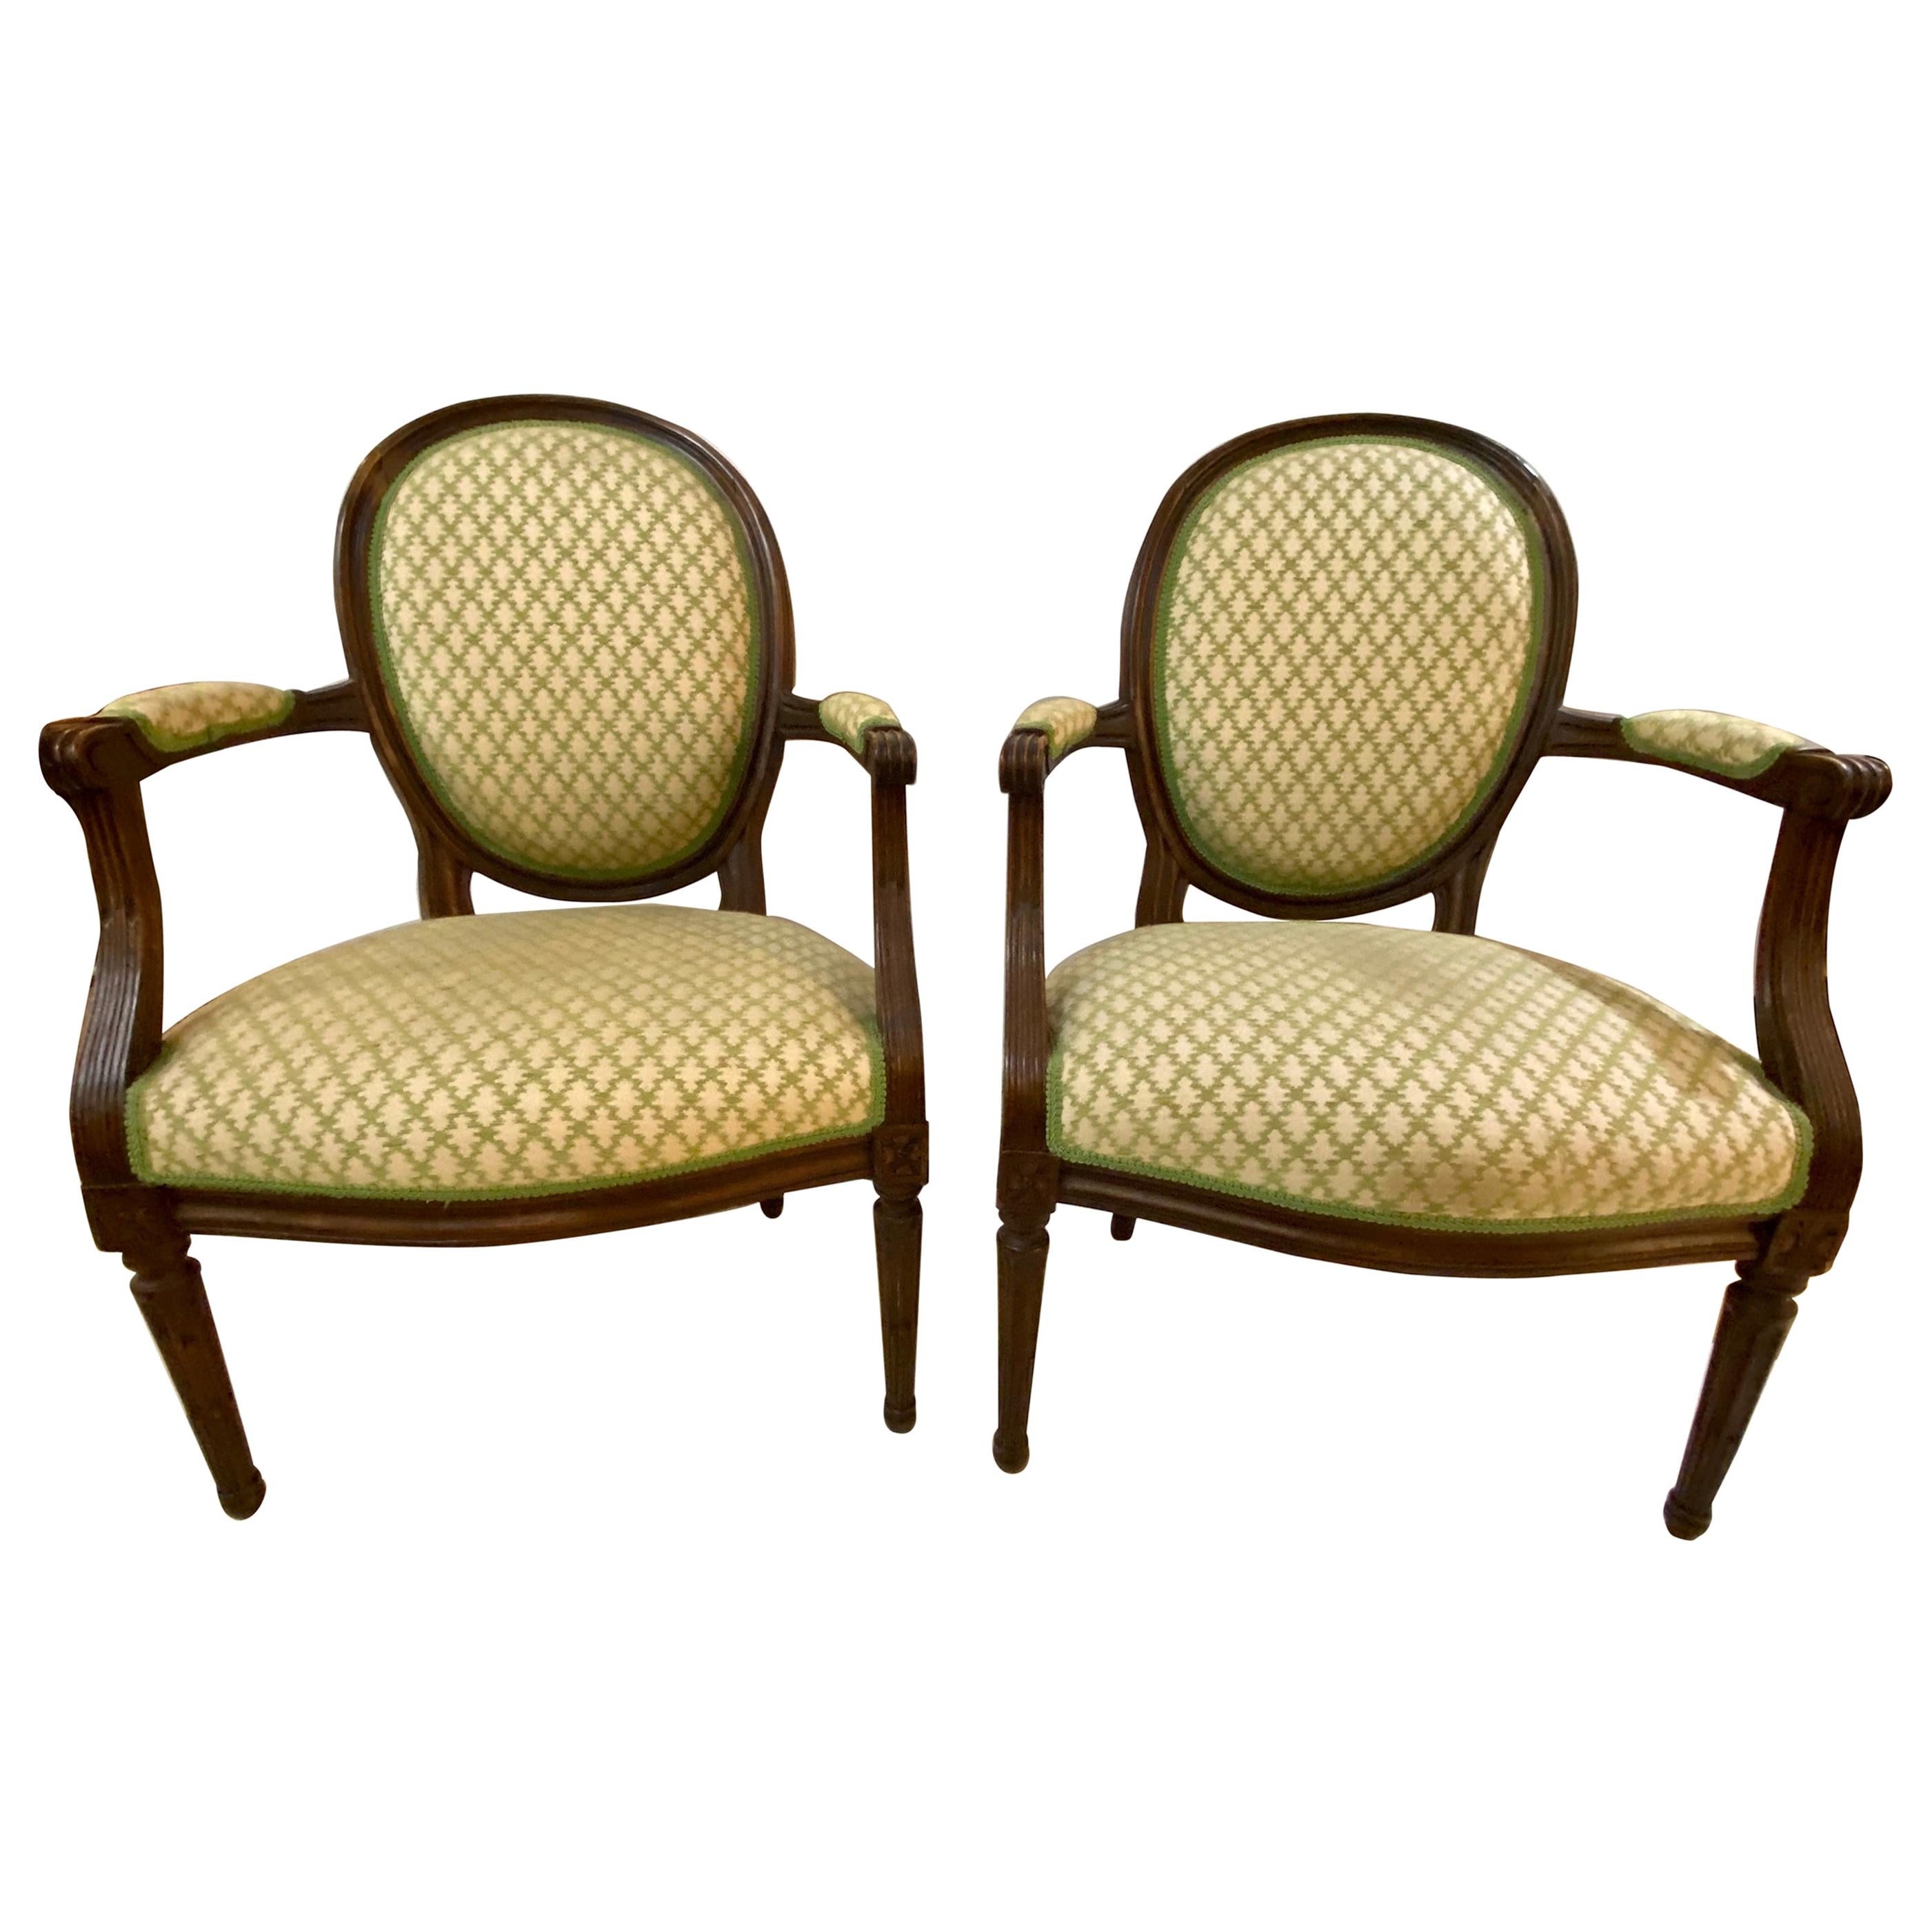 Pair of French Maison Jansen Bergeres or Armchairs in Walnut, Stamped JANSEN